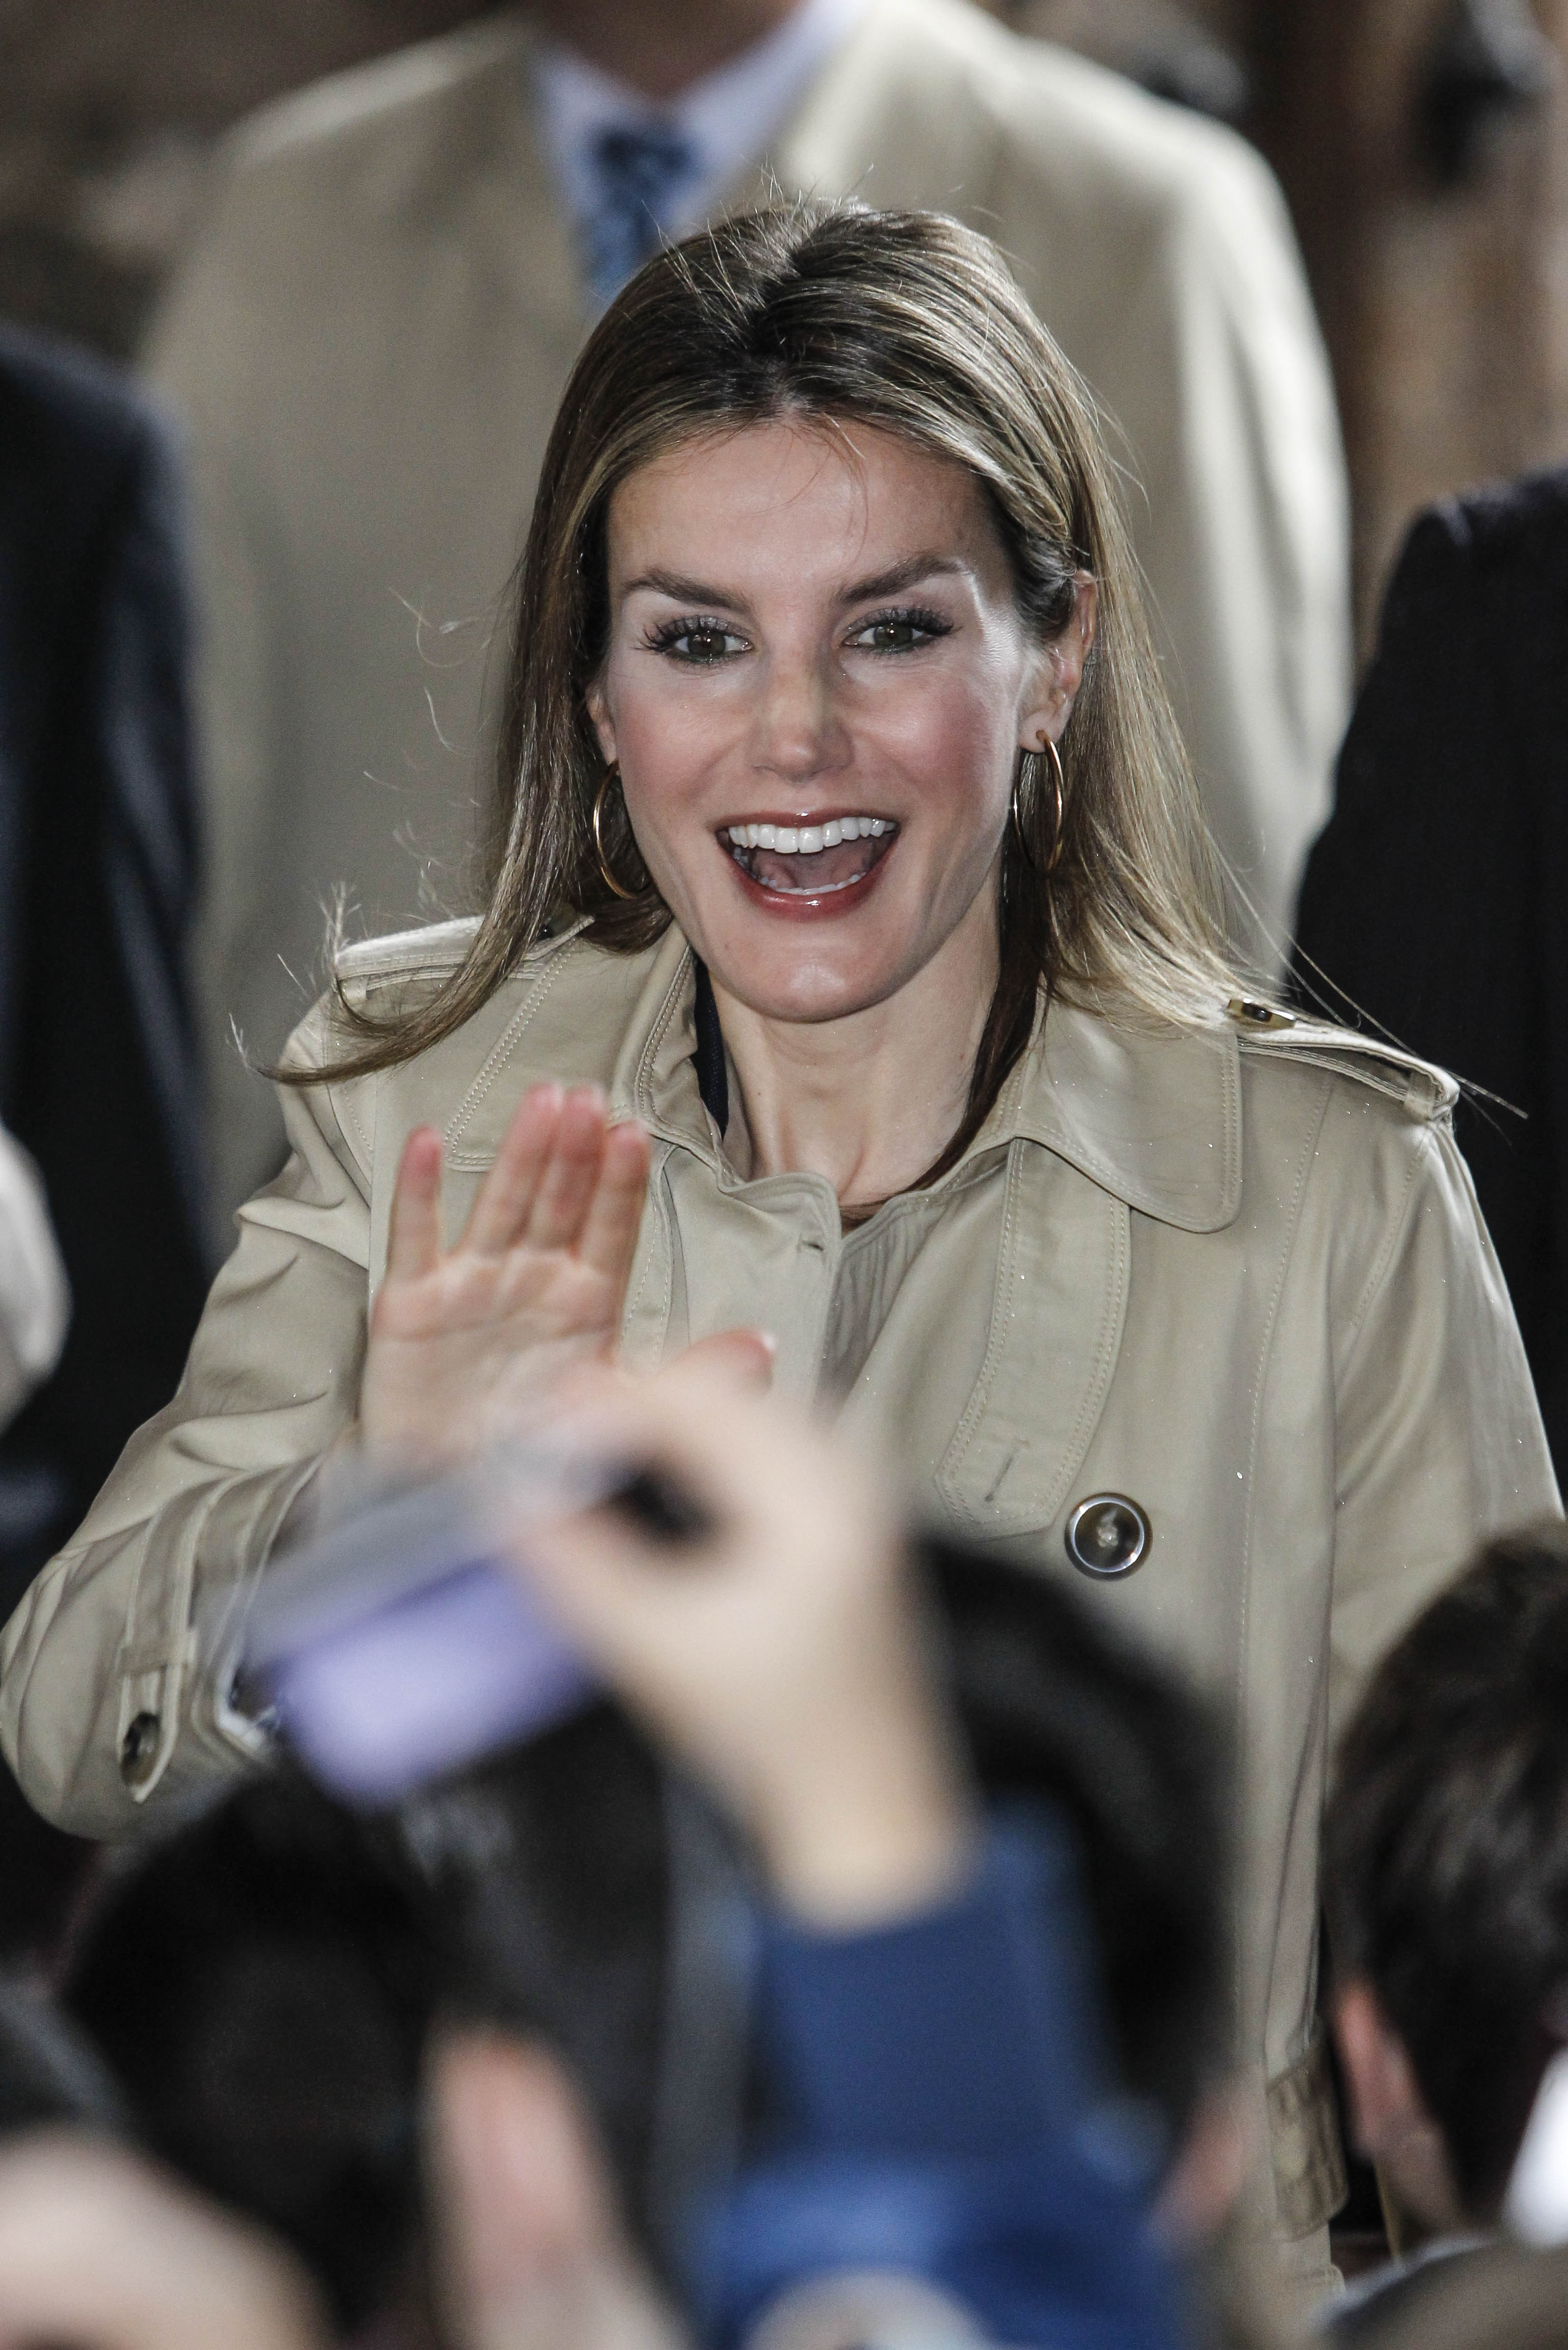 Princess Letizia of Spain waves to photographers at a seminar on Spanish language in journalism in San Millan de la Cogolla, Spain on May 28, 2014.